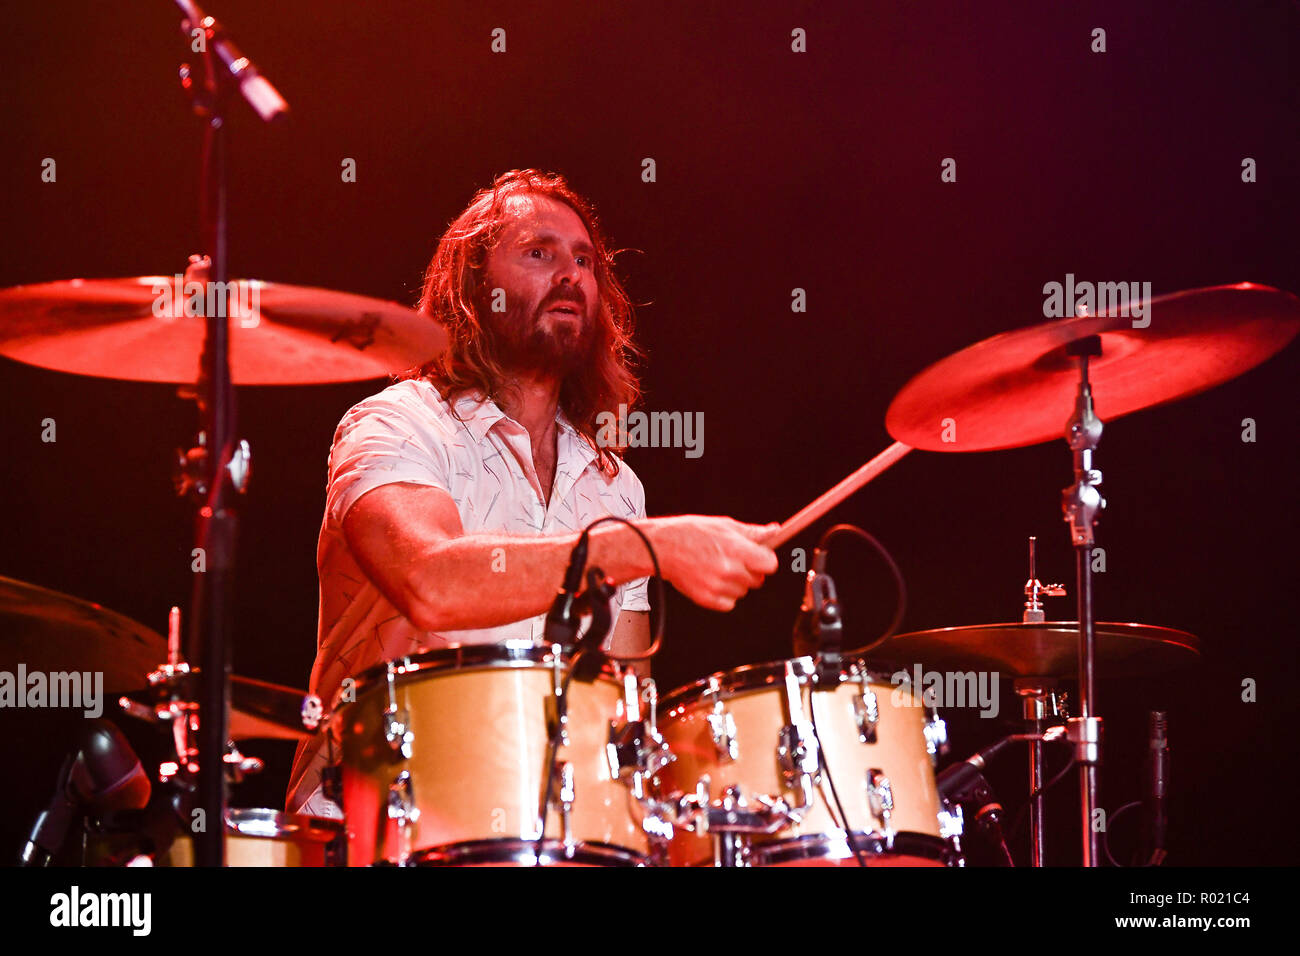 Santa Ana, California, USA. 30th Oct, 2018. Hamish Rosser Drums with Wolfmother performs October 30th, 2018 at The Observatory in Santa Ana, CA. to a sold out crowd. Credit: Dave Safley/ZUMA Wire/Alamy Live News Stock Photo